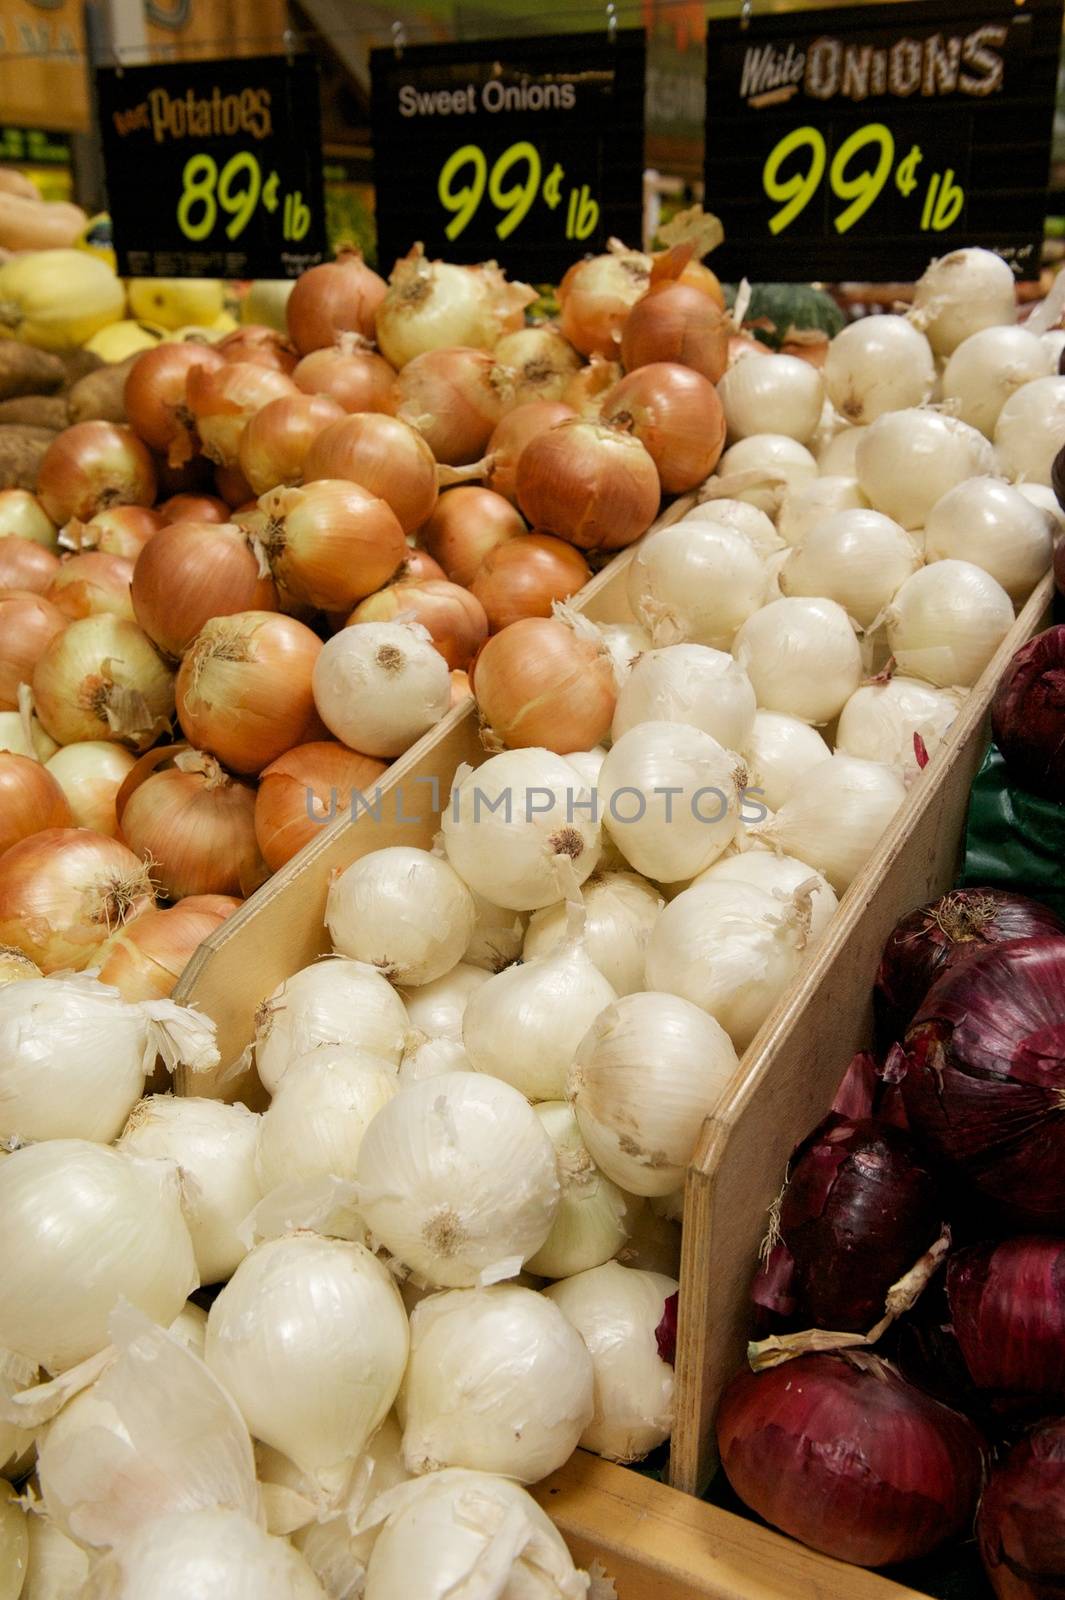 Grocery Store Bins Full of Yellow, White and Red Onions by pixelsnap